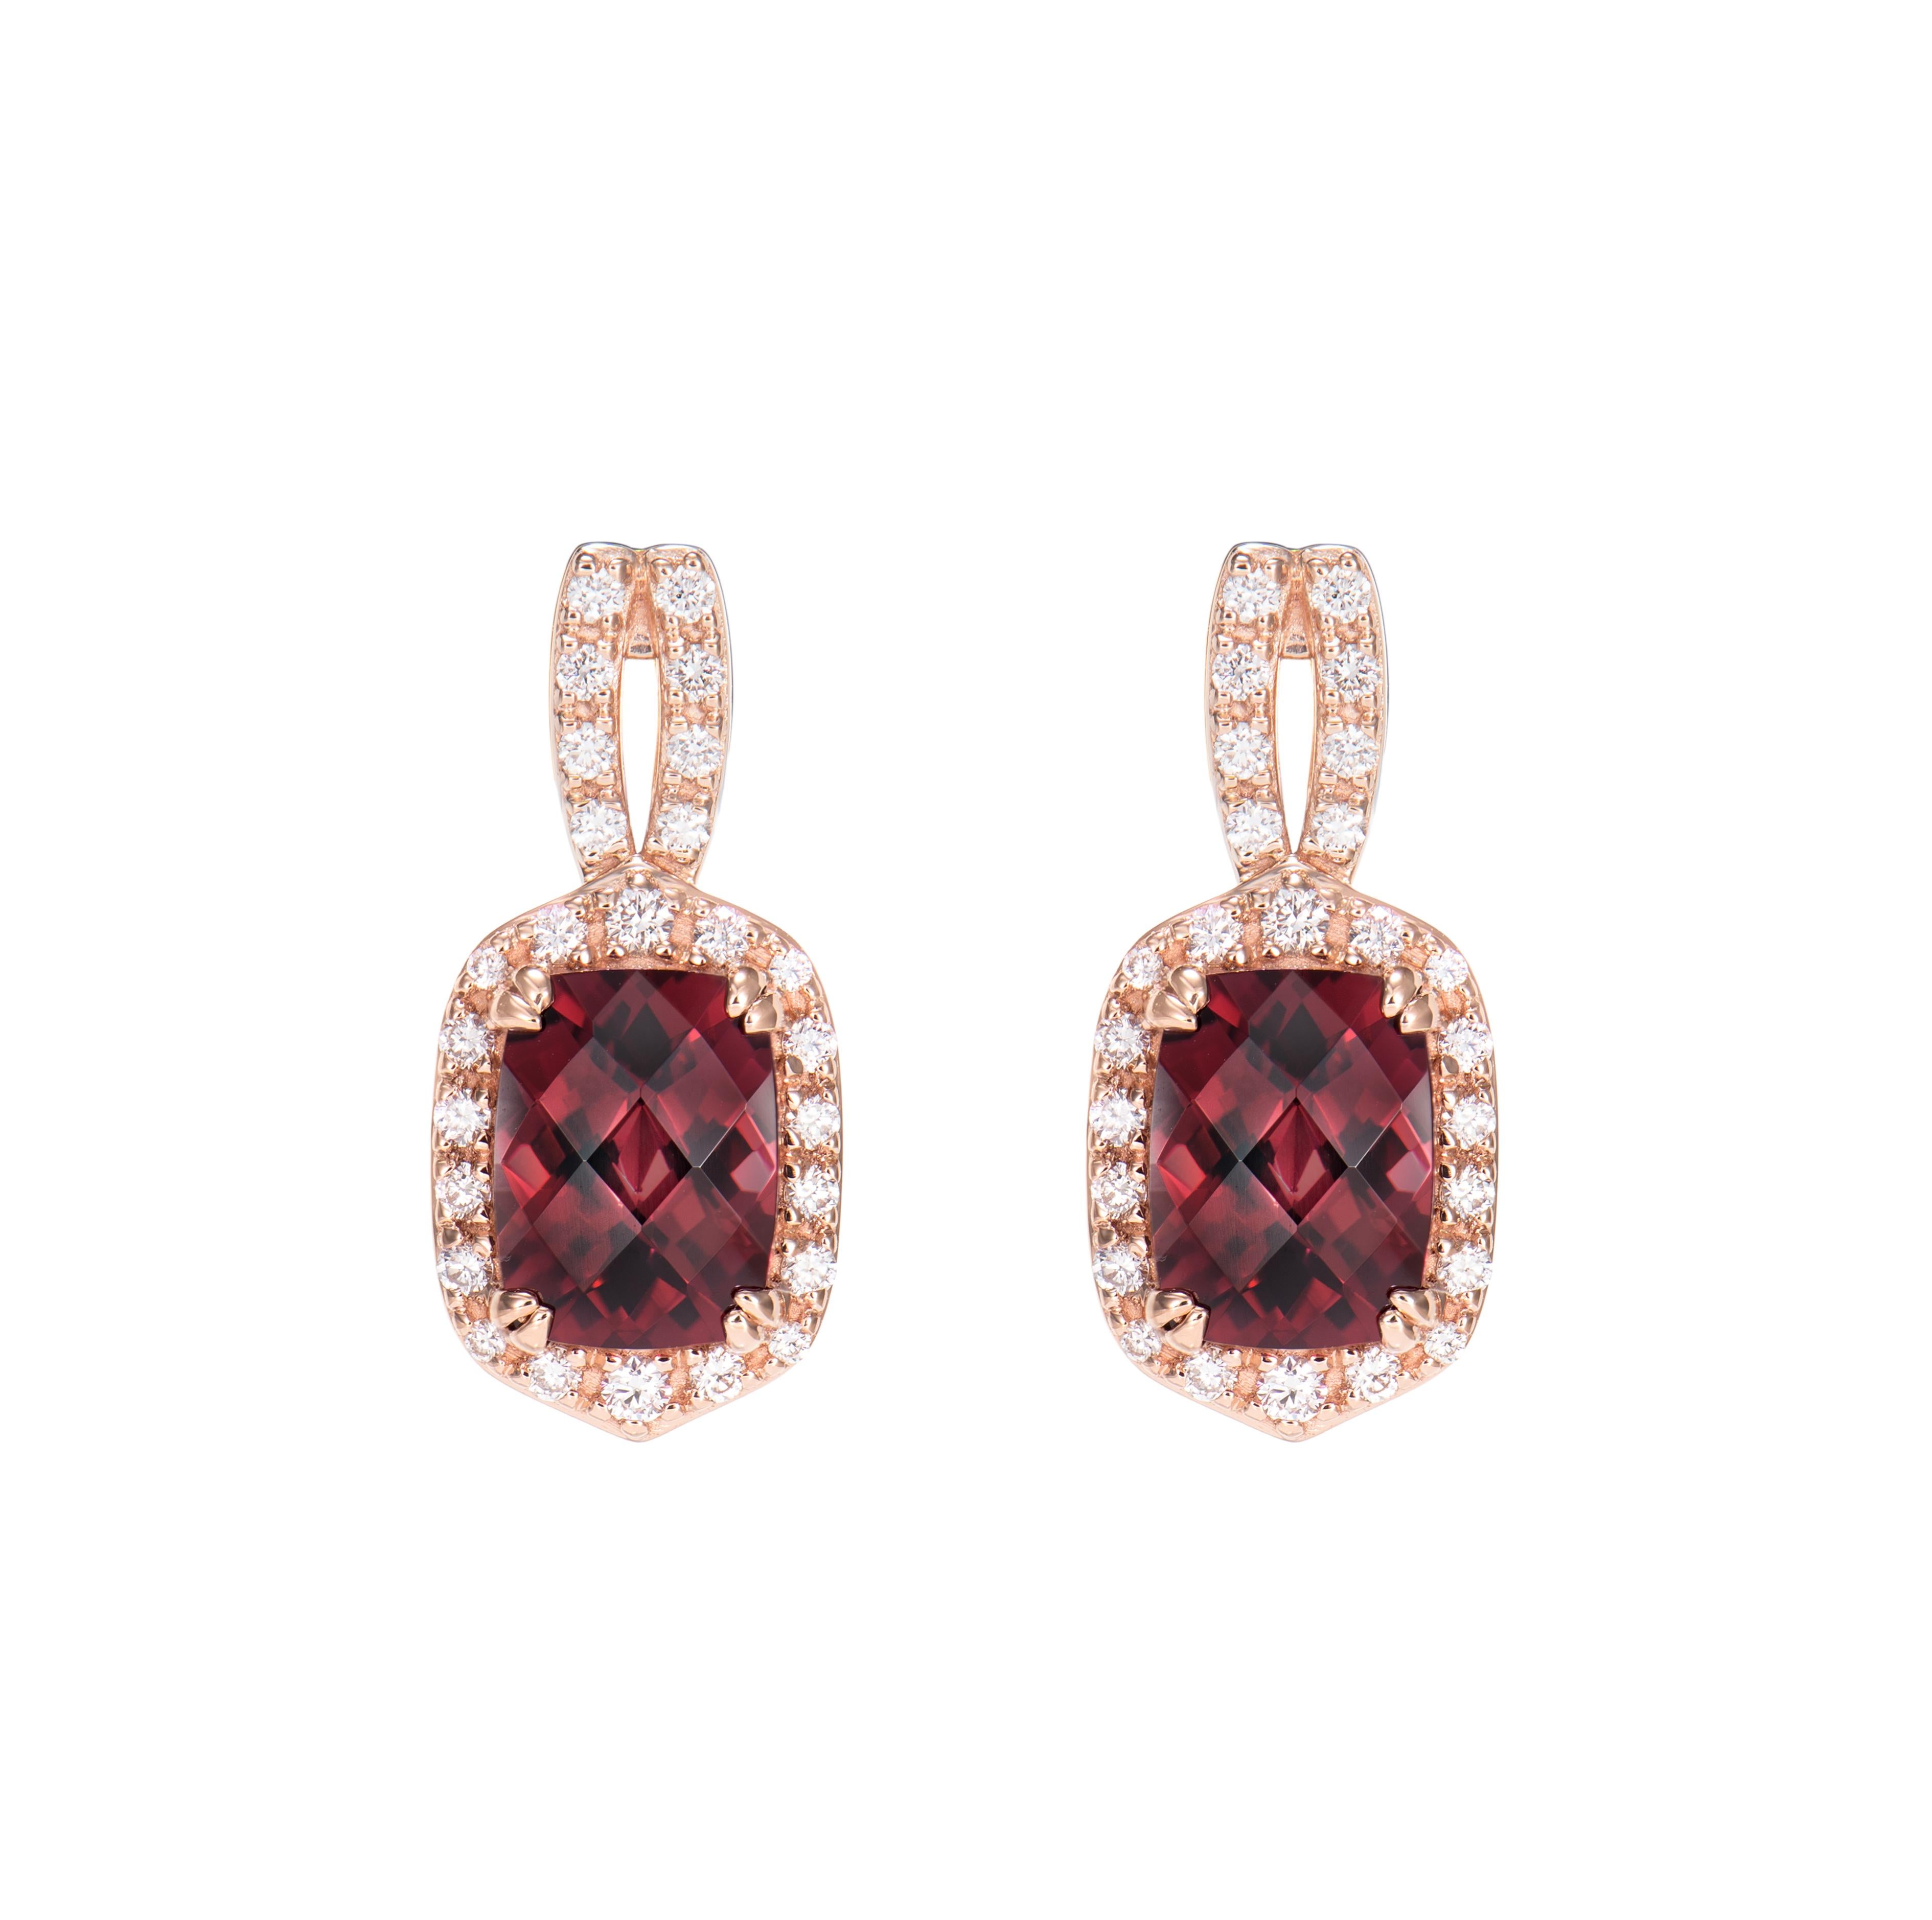 Contemporary 3.85 Carat Rhodolite Drop Earring in 18Karat Rose Gold with White Diamond. For Sale